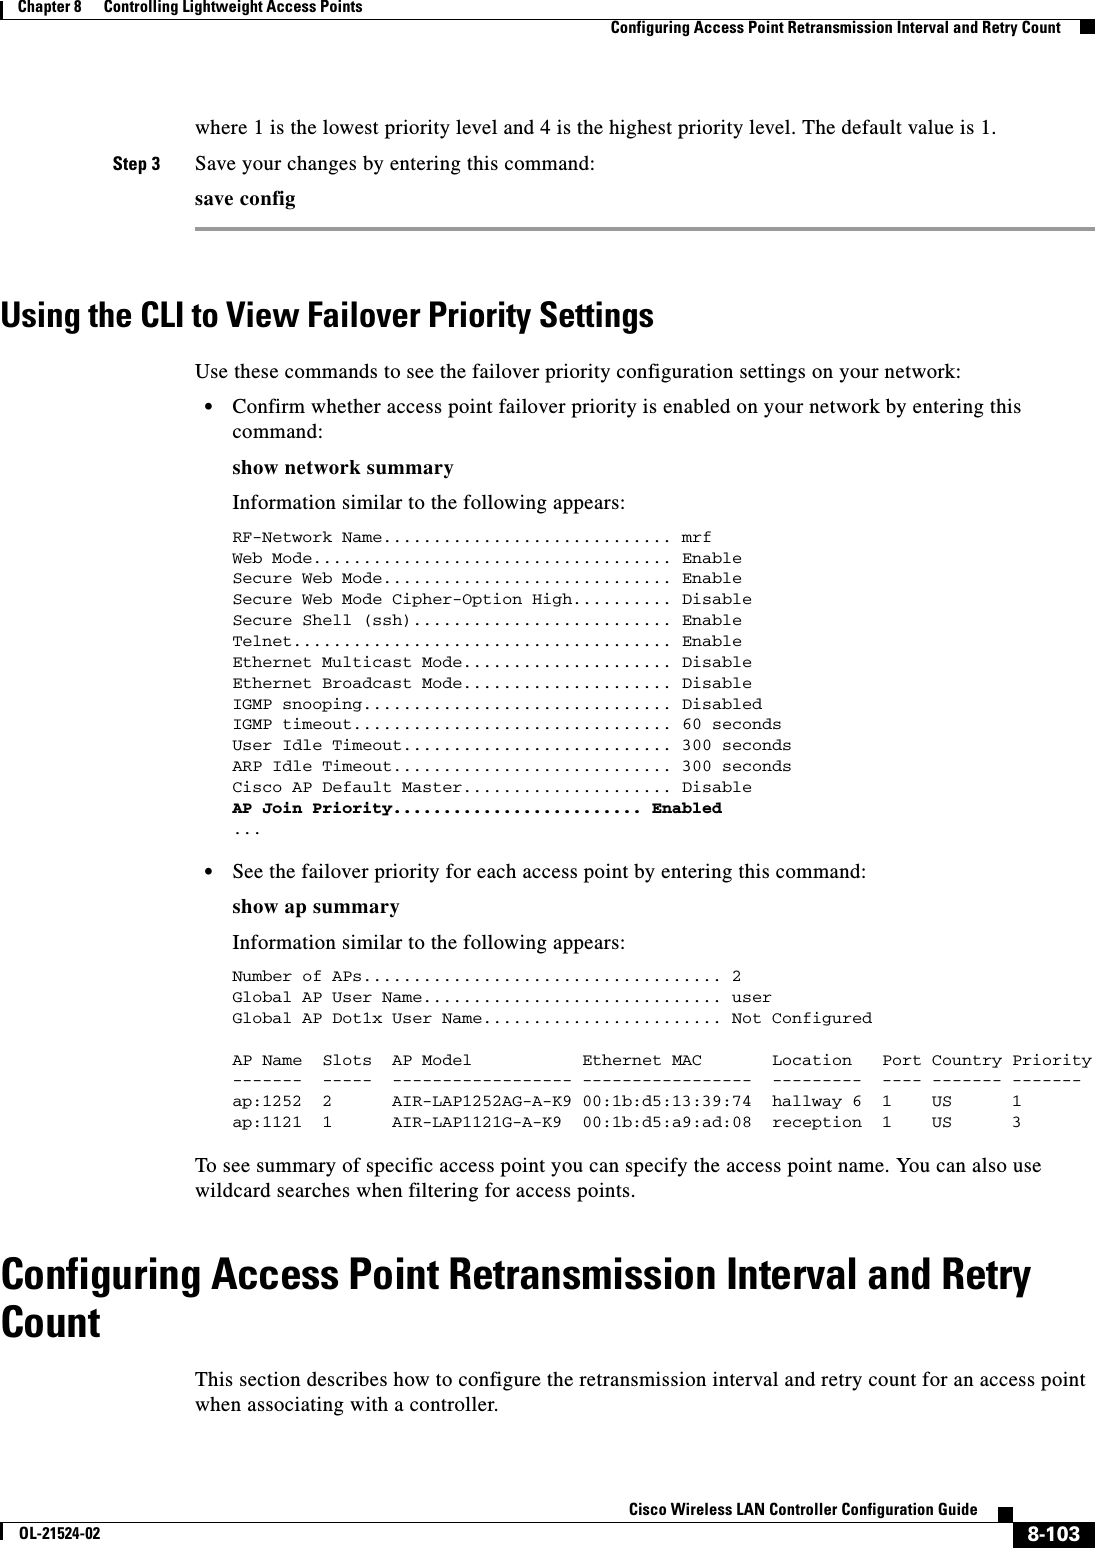  8-103Cisco Wireless LAN Controller Configuration GuideOL-21524-02Chapter 8      Controlling Lightweight Access Points  Configuring Access Point Retransmission Interval and Retry Countwhere 1 is the lowest priority level and 4 is the highest priority level. The default value is 1.Step 3 Save your changes by entering this command:save configUsing the CLI to View Failover Priority SettingsUse these commands to see the failover priority configuration settings on your network:  • Confirm whether access point failover priority is enabled on your network by entering this command:show network summaryInformation similar to the following appears:RF-Network Name............................. mrfWeb Mode.................................... EnableSecure Web Mode............................. EnableSecure Web Mode Cipher-Option High.......... DisableSecure Shell (ssh).......................... Enable Telnet...................................... EnableEthernet Multicast Mode..................... DisableEthernet Broadcast Mode..................... DisableIGMP snooping............................... DisabledIGMP timeout................................ 60 secondsUser Idle Timeout........................... 300 secondsARP Idle Timeout............................ 300 secondsCisco AP Default Master..................... DisableAP Join Priority......................... Enabled ...  • See the failover priority for each access point by entering this command:show ap summaryInformation similar to the following appears:Number of APs.................................... 2Global AP User Name.............................. userGlobal AP Dot1x User Name........................ Not ConfiguredAP Name  Slots  AP Model           Ethernet MAC       Location   Port Country Priority-------  -----  ------------------ -----------------  ---------  ---- ------- -------ap:1252  2      AIR-LAP1252AG-A-K9 00:1b:d5:13:39:74  hallway 6  1    US      1ap:1121  1      AIR-LAP1121G-A-K9  00:1b:d5:a9:ad:08  reception  1    US      3To see summary of specific access point you can specify the access point name. You can also use wildcard searches when filtering for access points.Configuring Access Point Retransmission Interval and Retry CountThis section describes how to configure the retransmission interval and retry count for an access point when associating with a controller.